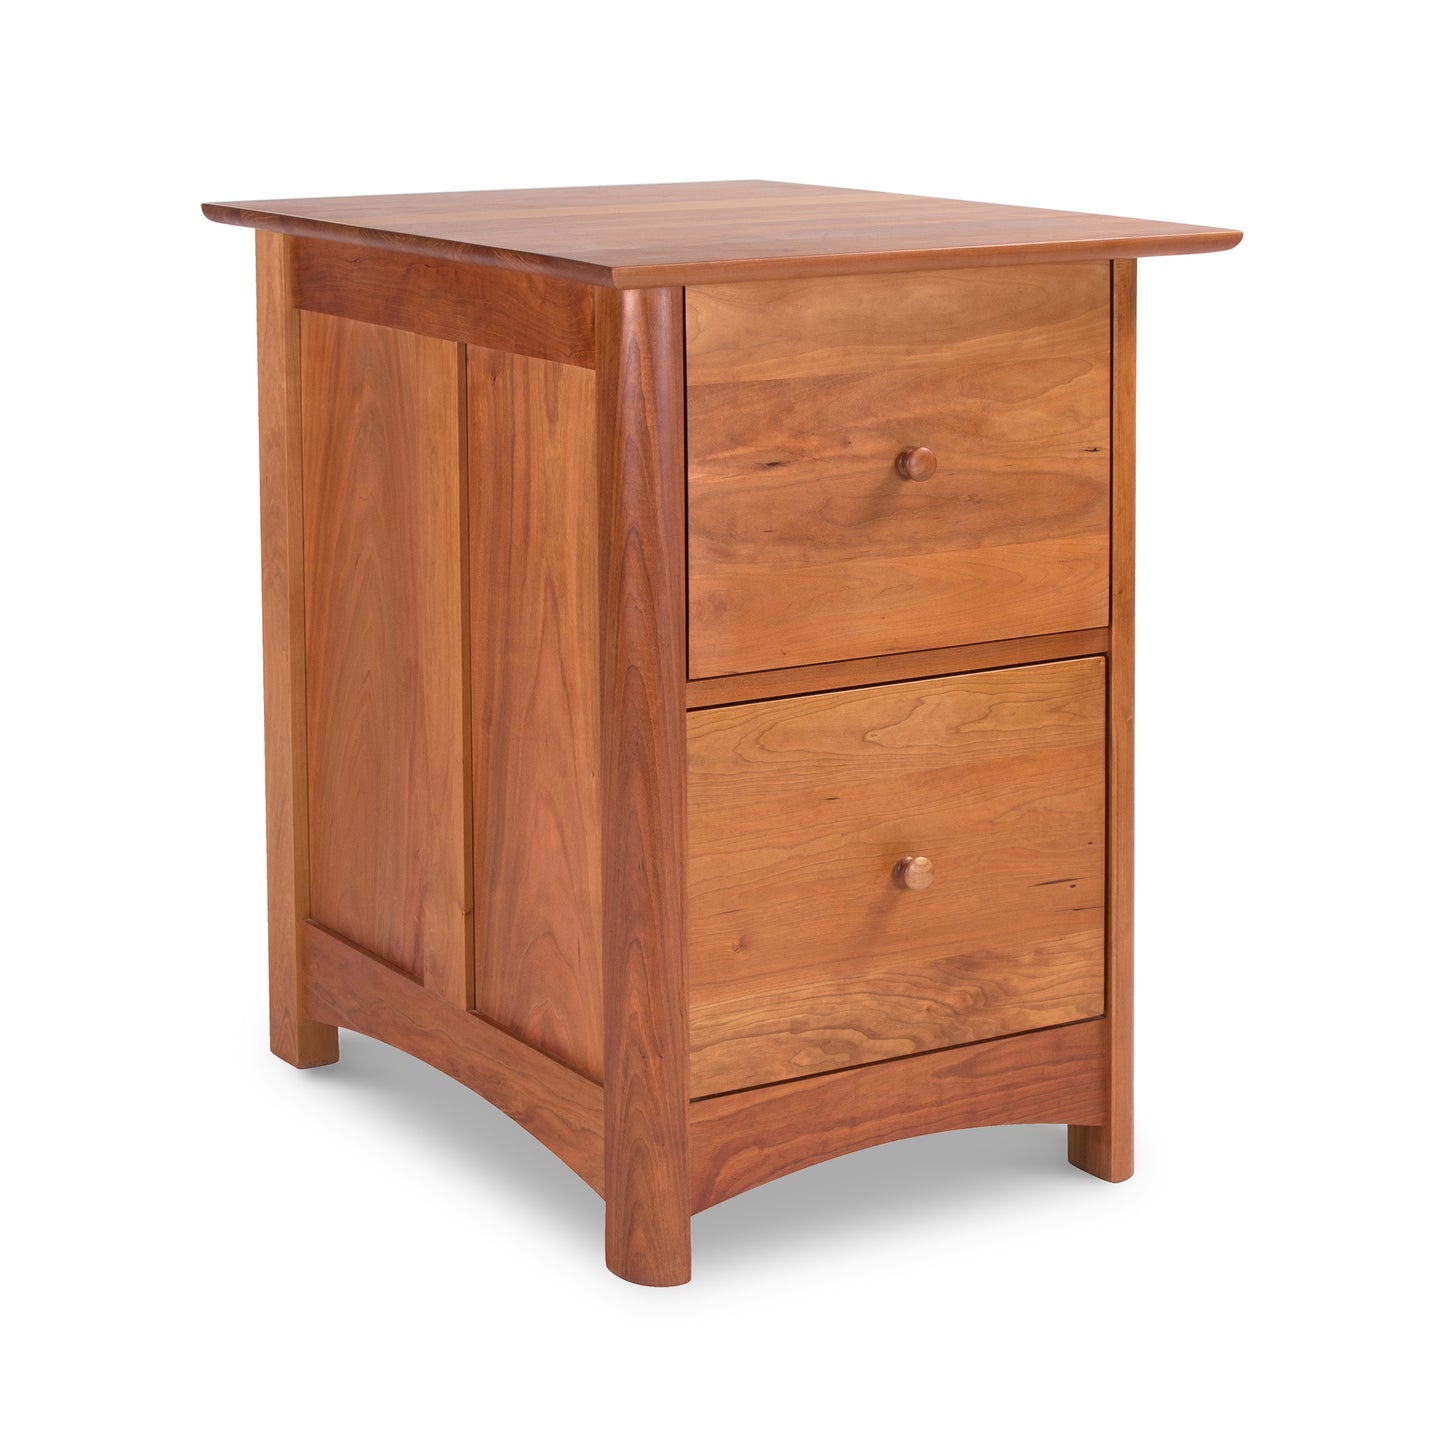 Wooden bedside table, in Vermont Furniture Designs Heartwood Shaker Style with two drawers, isolated on a white background.